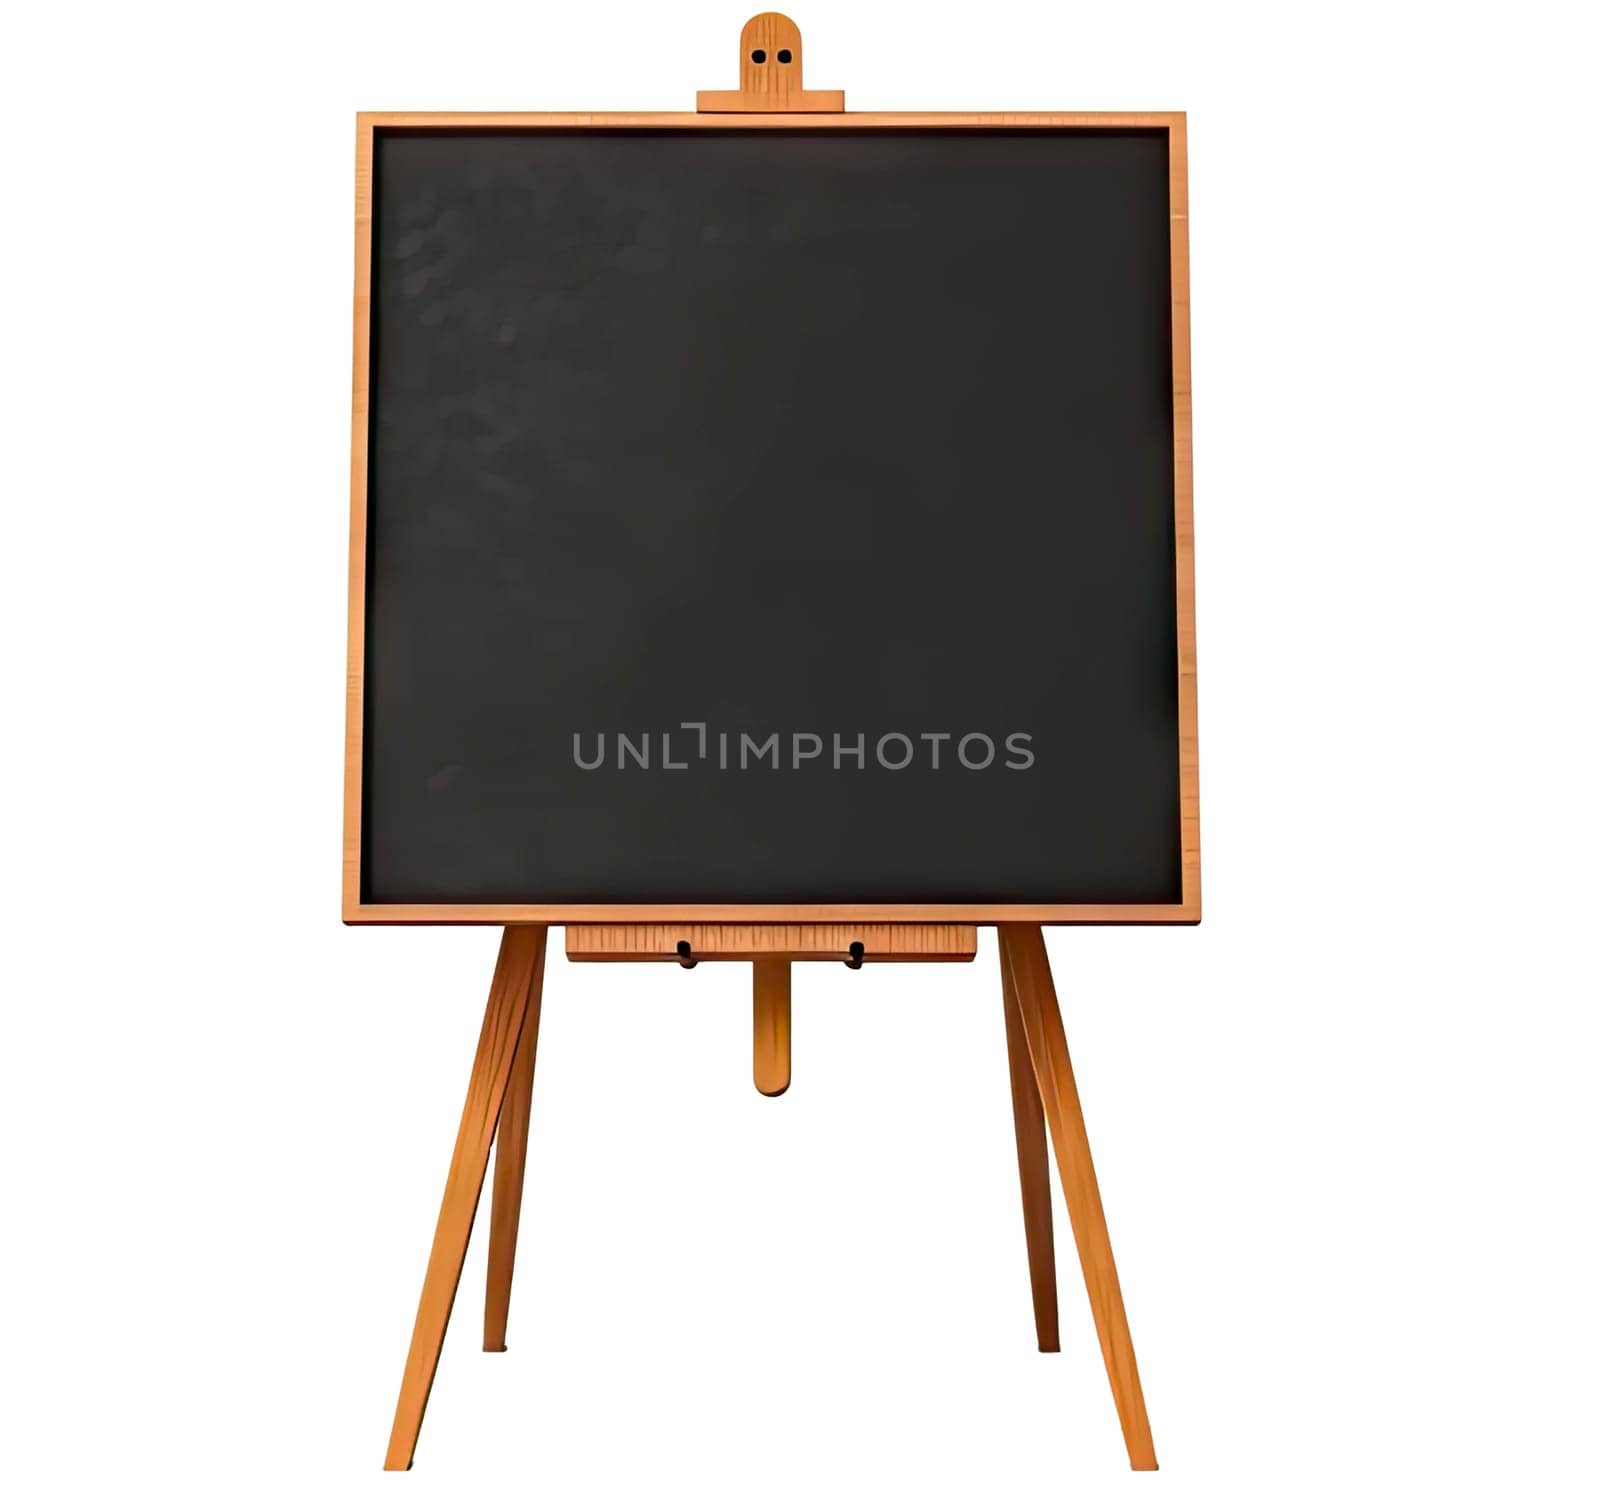 Slate board with wood frame on transparent background.